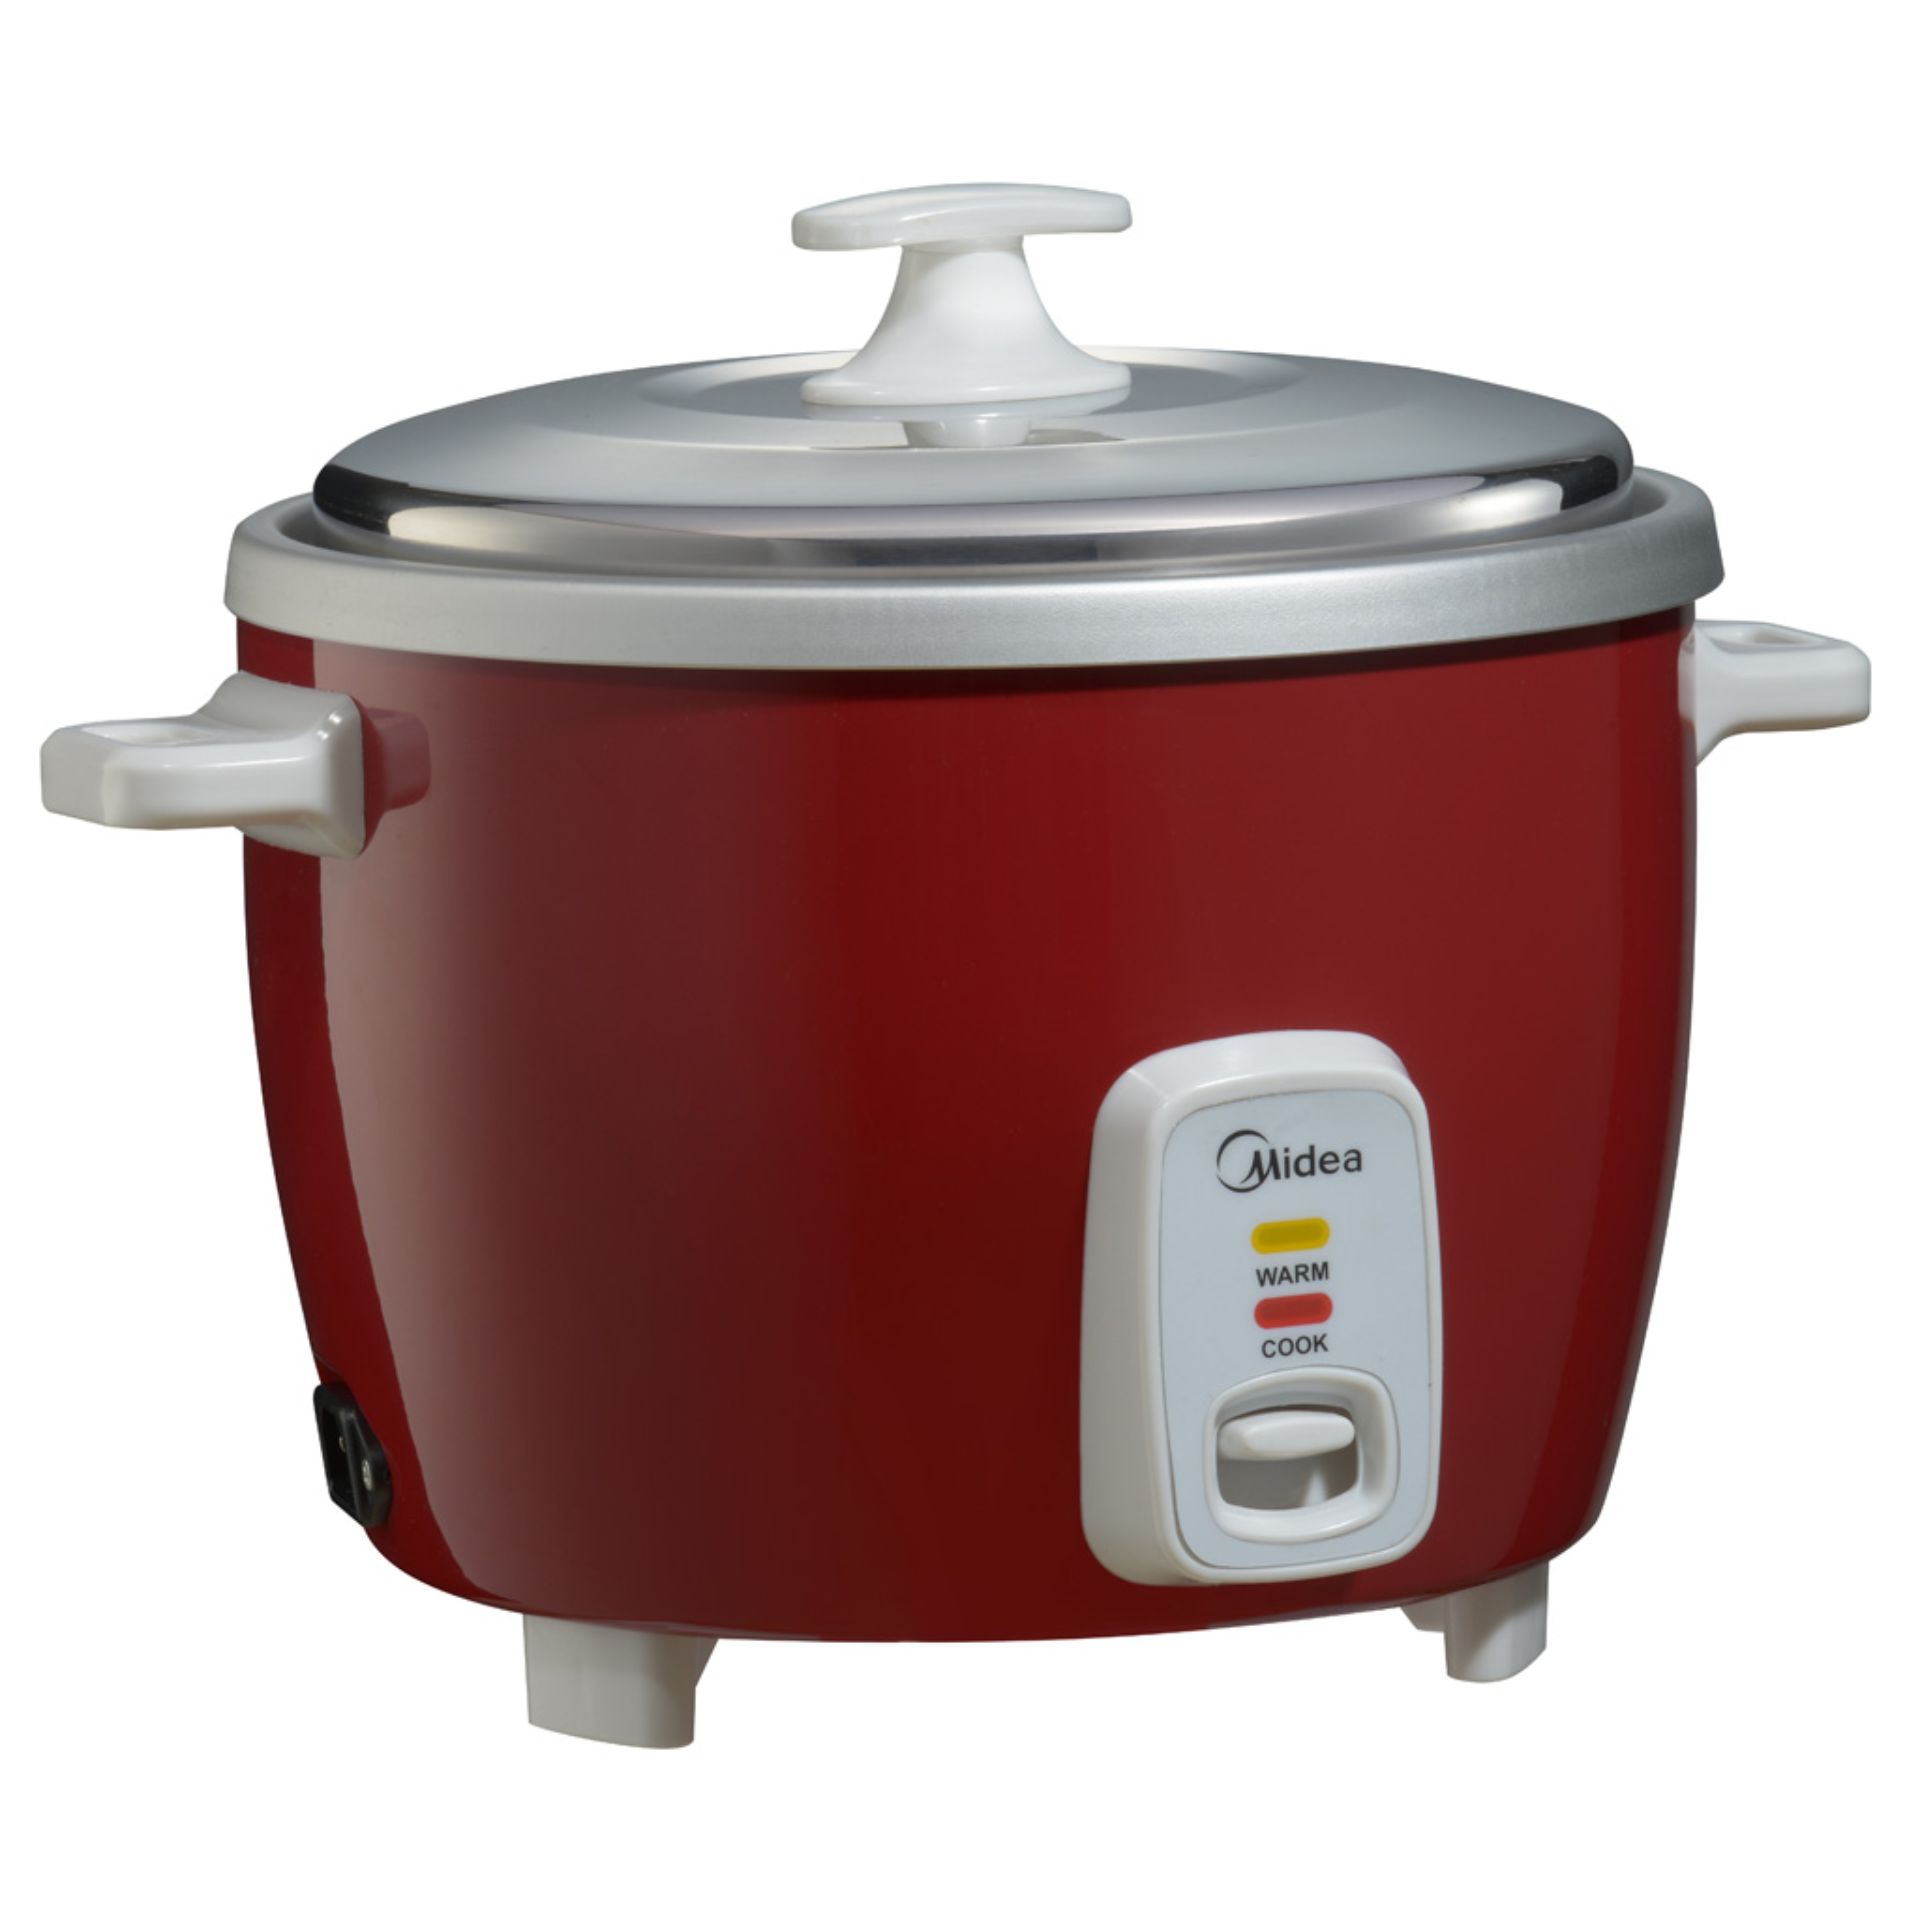 https://www.midea.com/content/dam/midea-aem/my/kitchen-appliances/cookers/rice-cookers/1-8l-conventional-rice-cooker-mr-gm18sda-r/gallery2.jpg